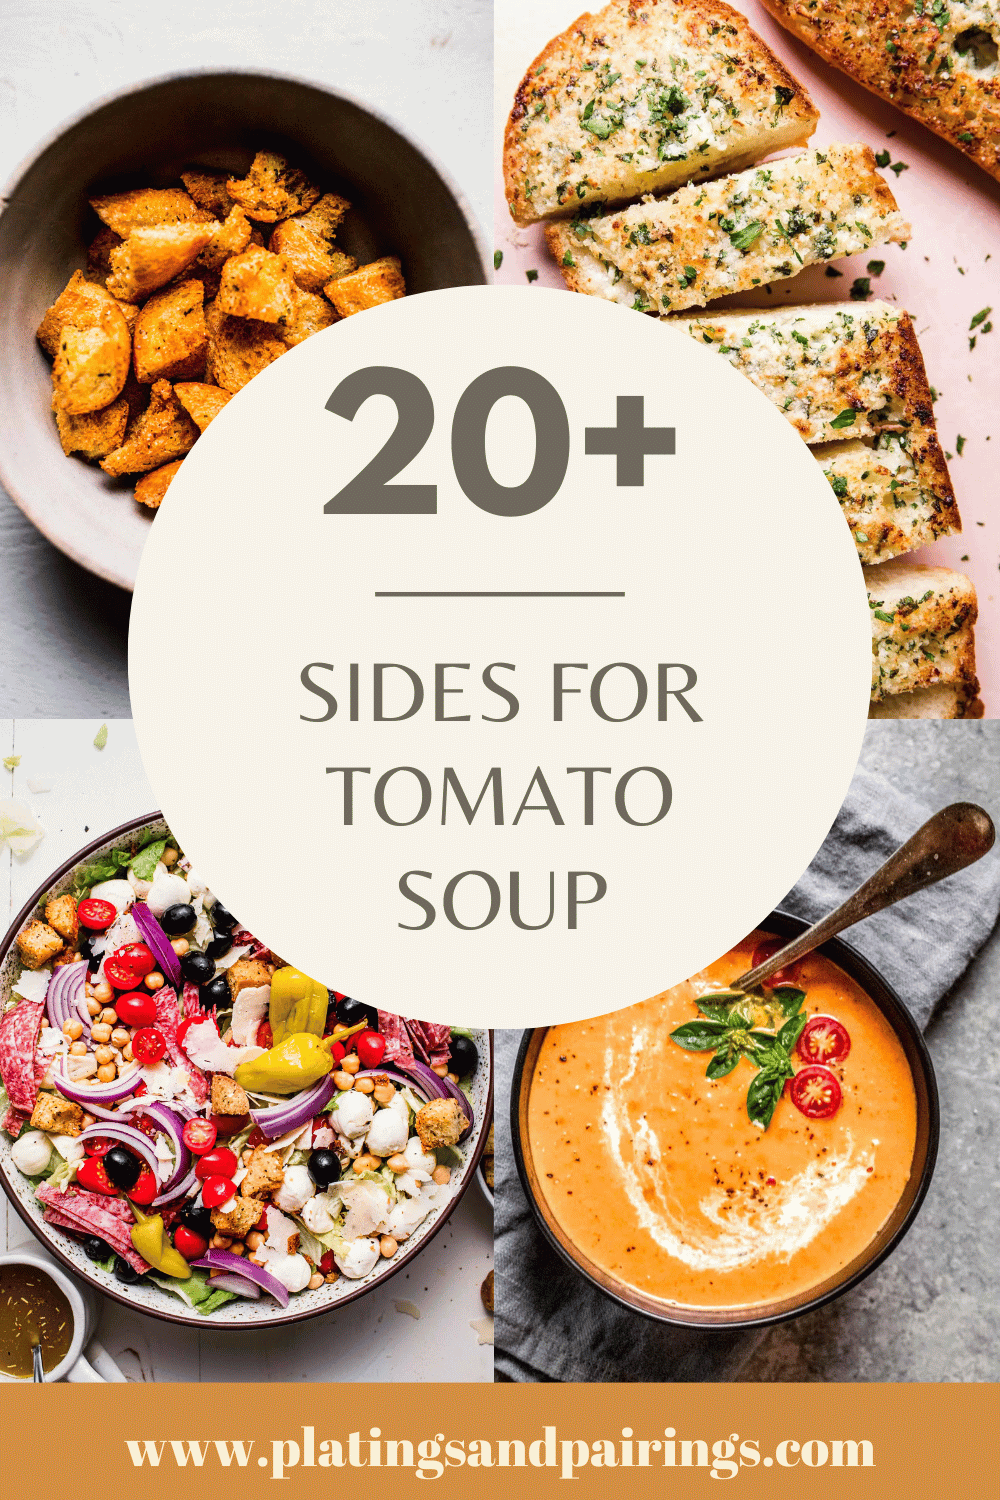 Collage of side dishes for tomato soup with text overlay.